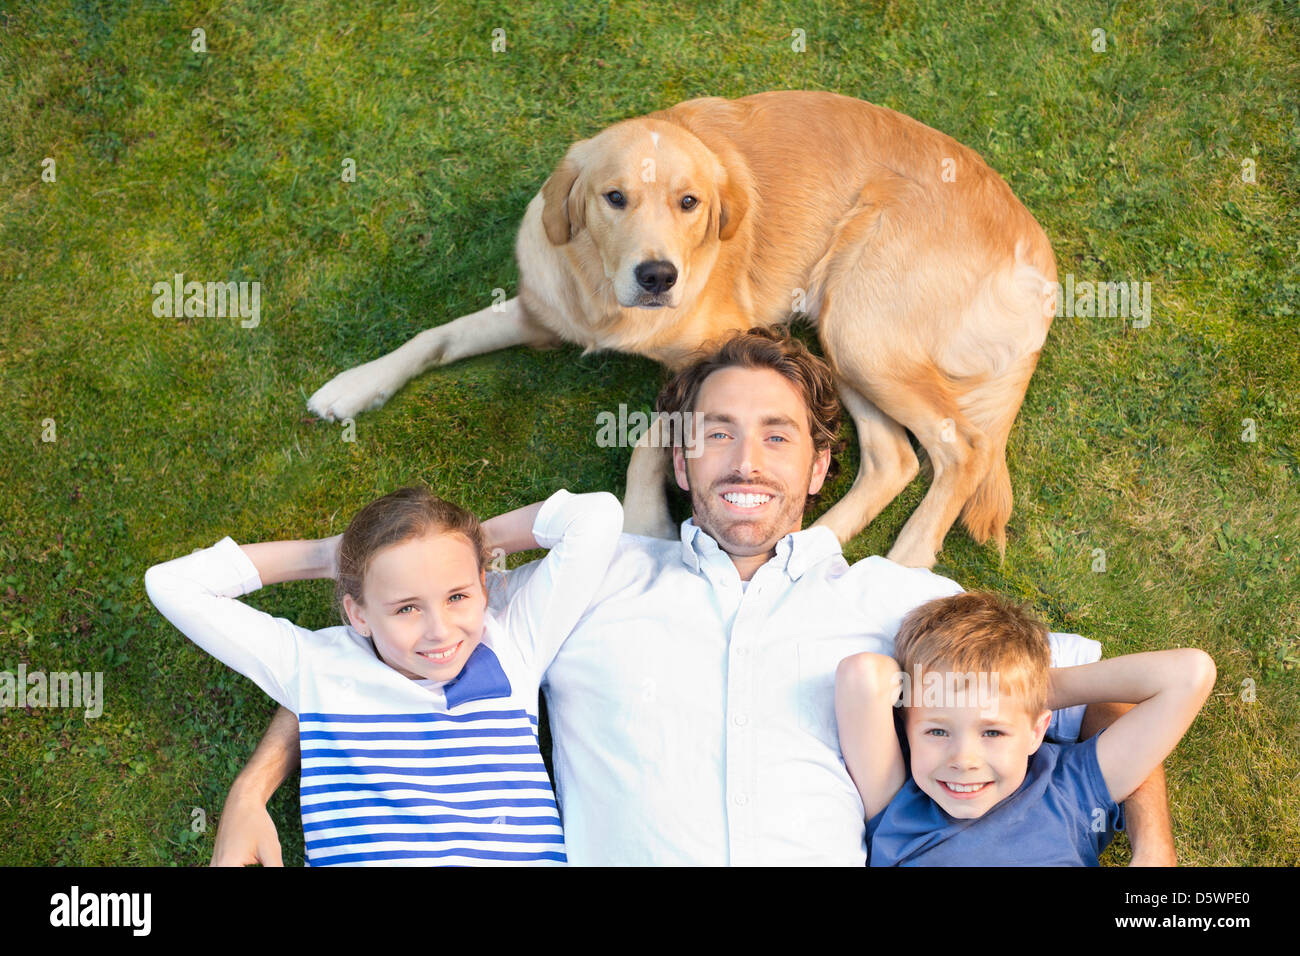 Family relaxing with dog on lawn Banque D'Images